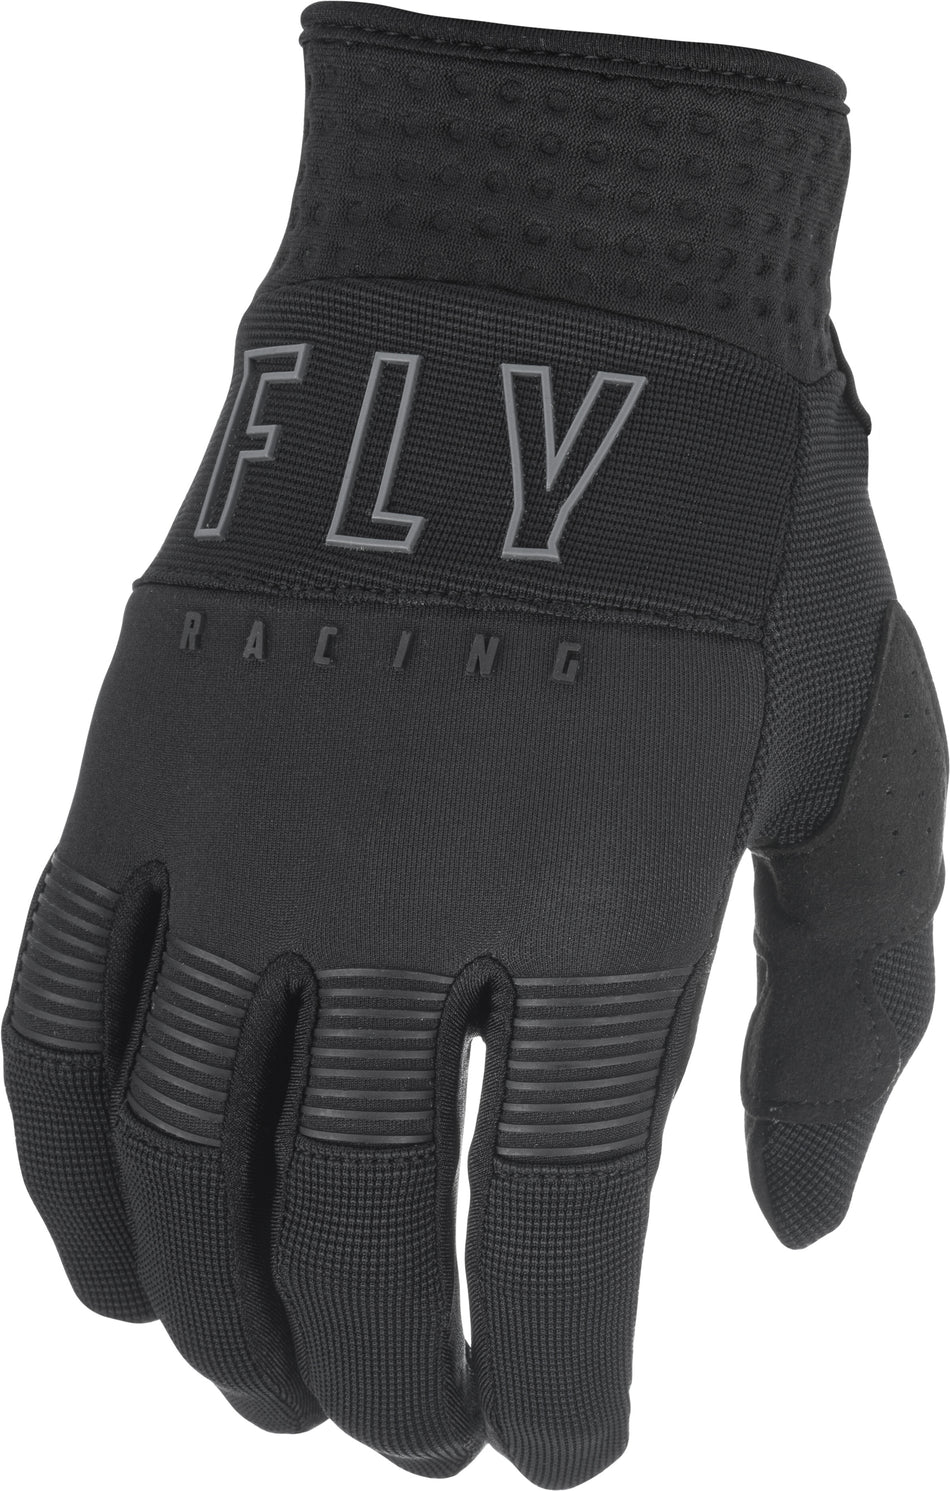 FLY RACING Youth F-16 Gloves Black Sz 05 374-91705